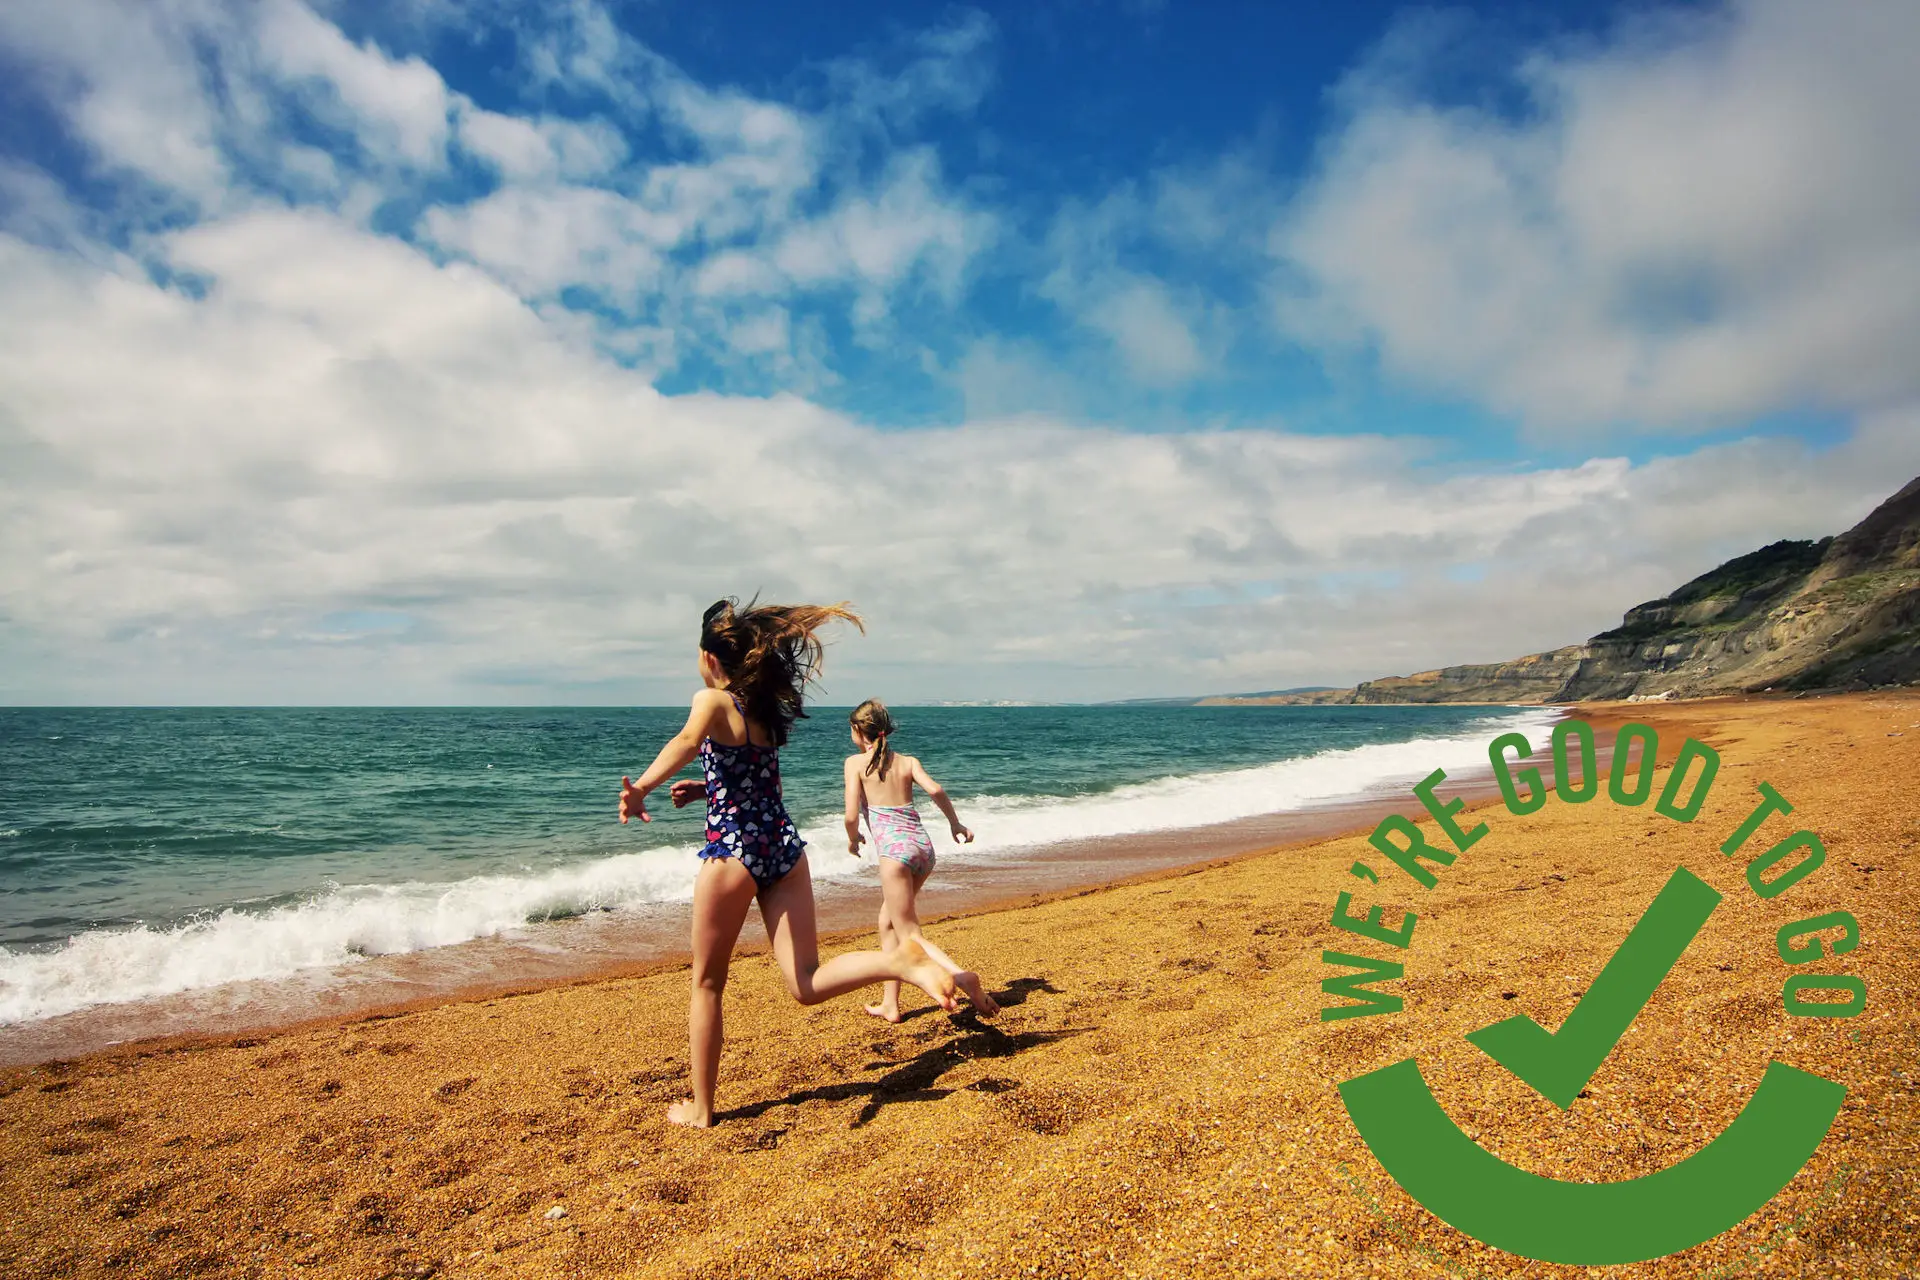 Visit Isle of Wight children on beach and good to go logo